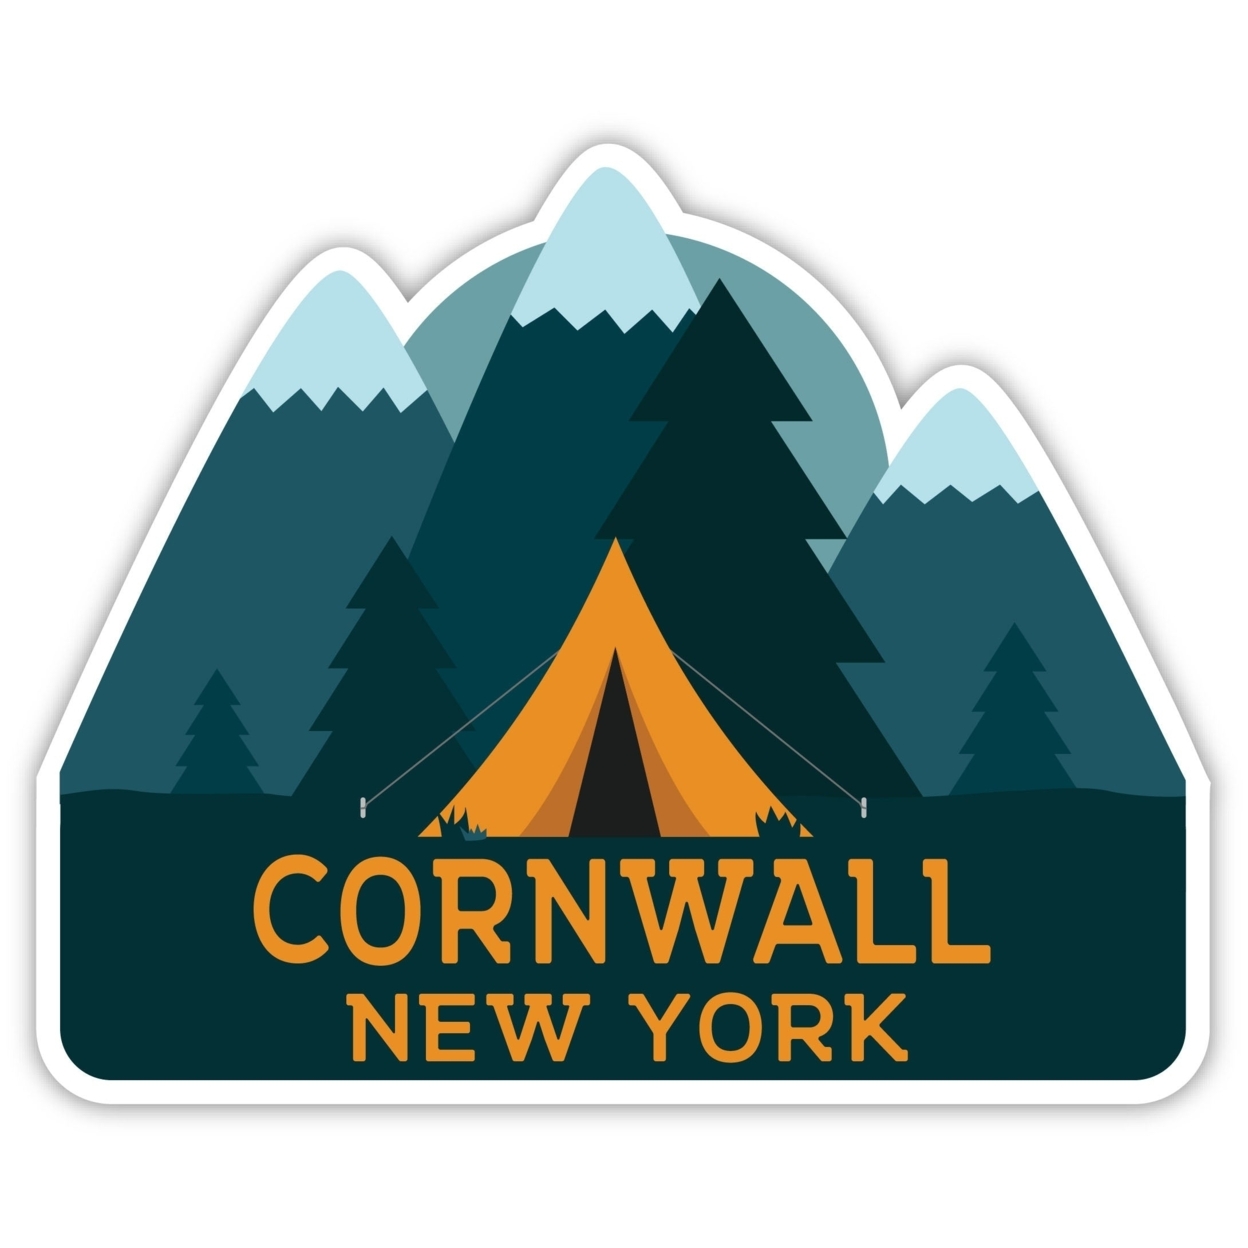 Cornwall New York Souvenir Decorative Stickers (Choose Theme And Size) - Single Unit, 10-Inch, Tent